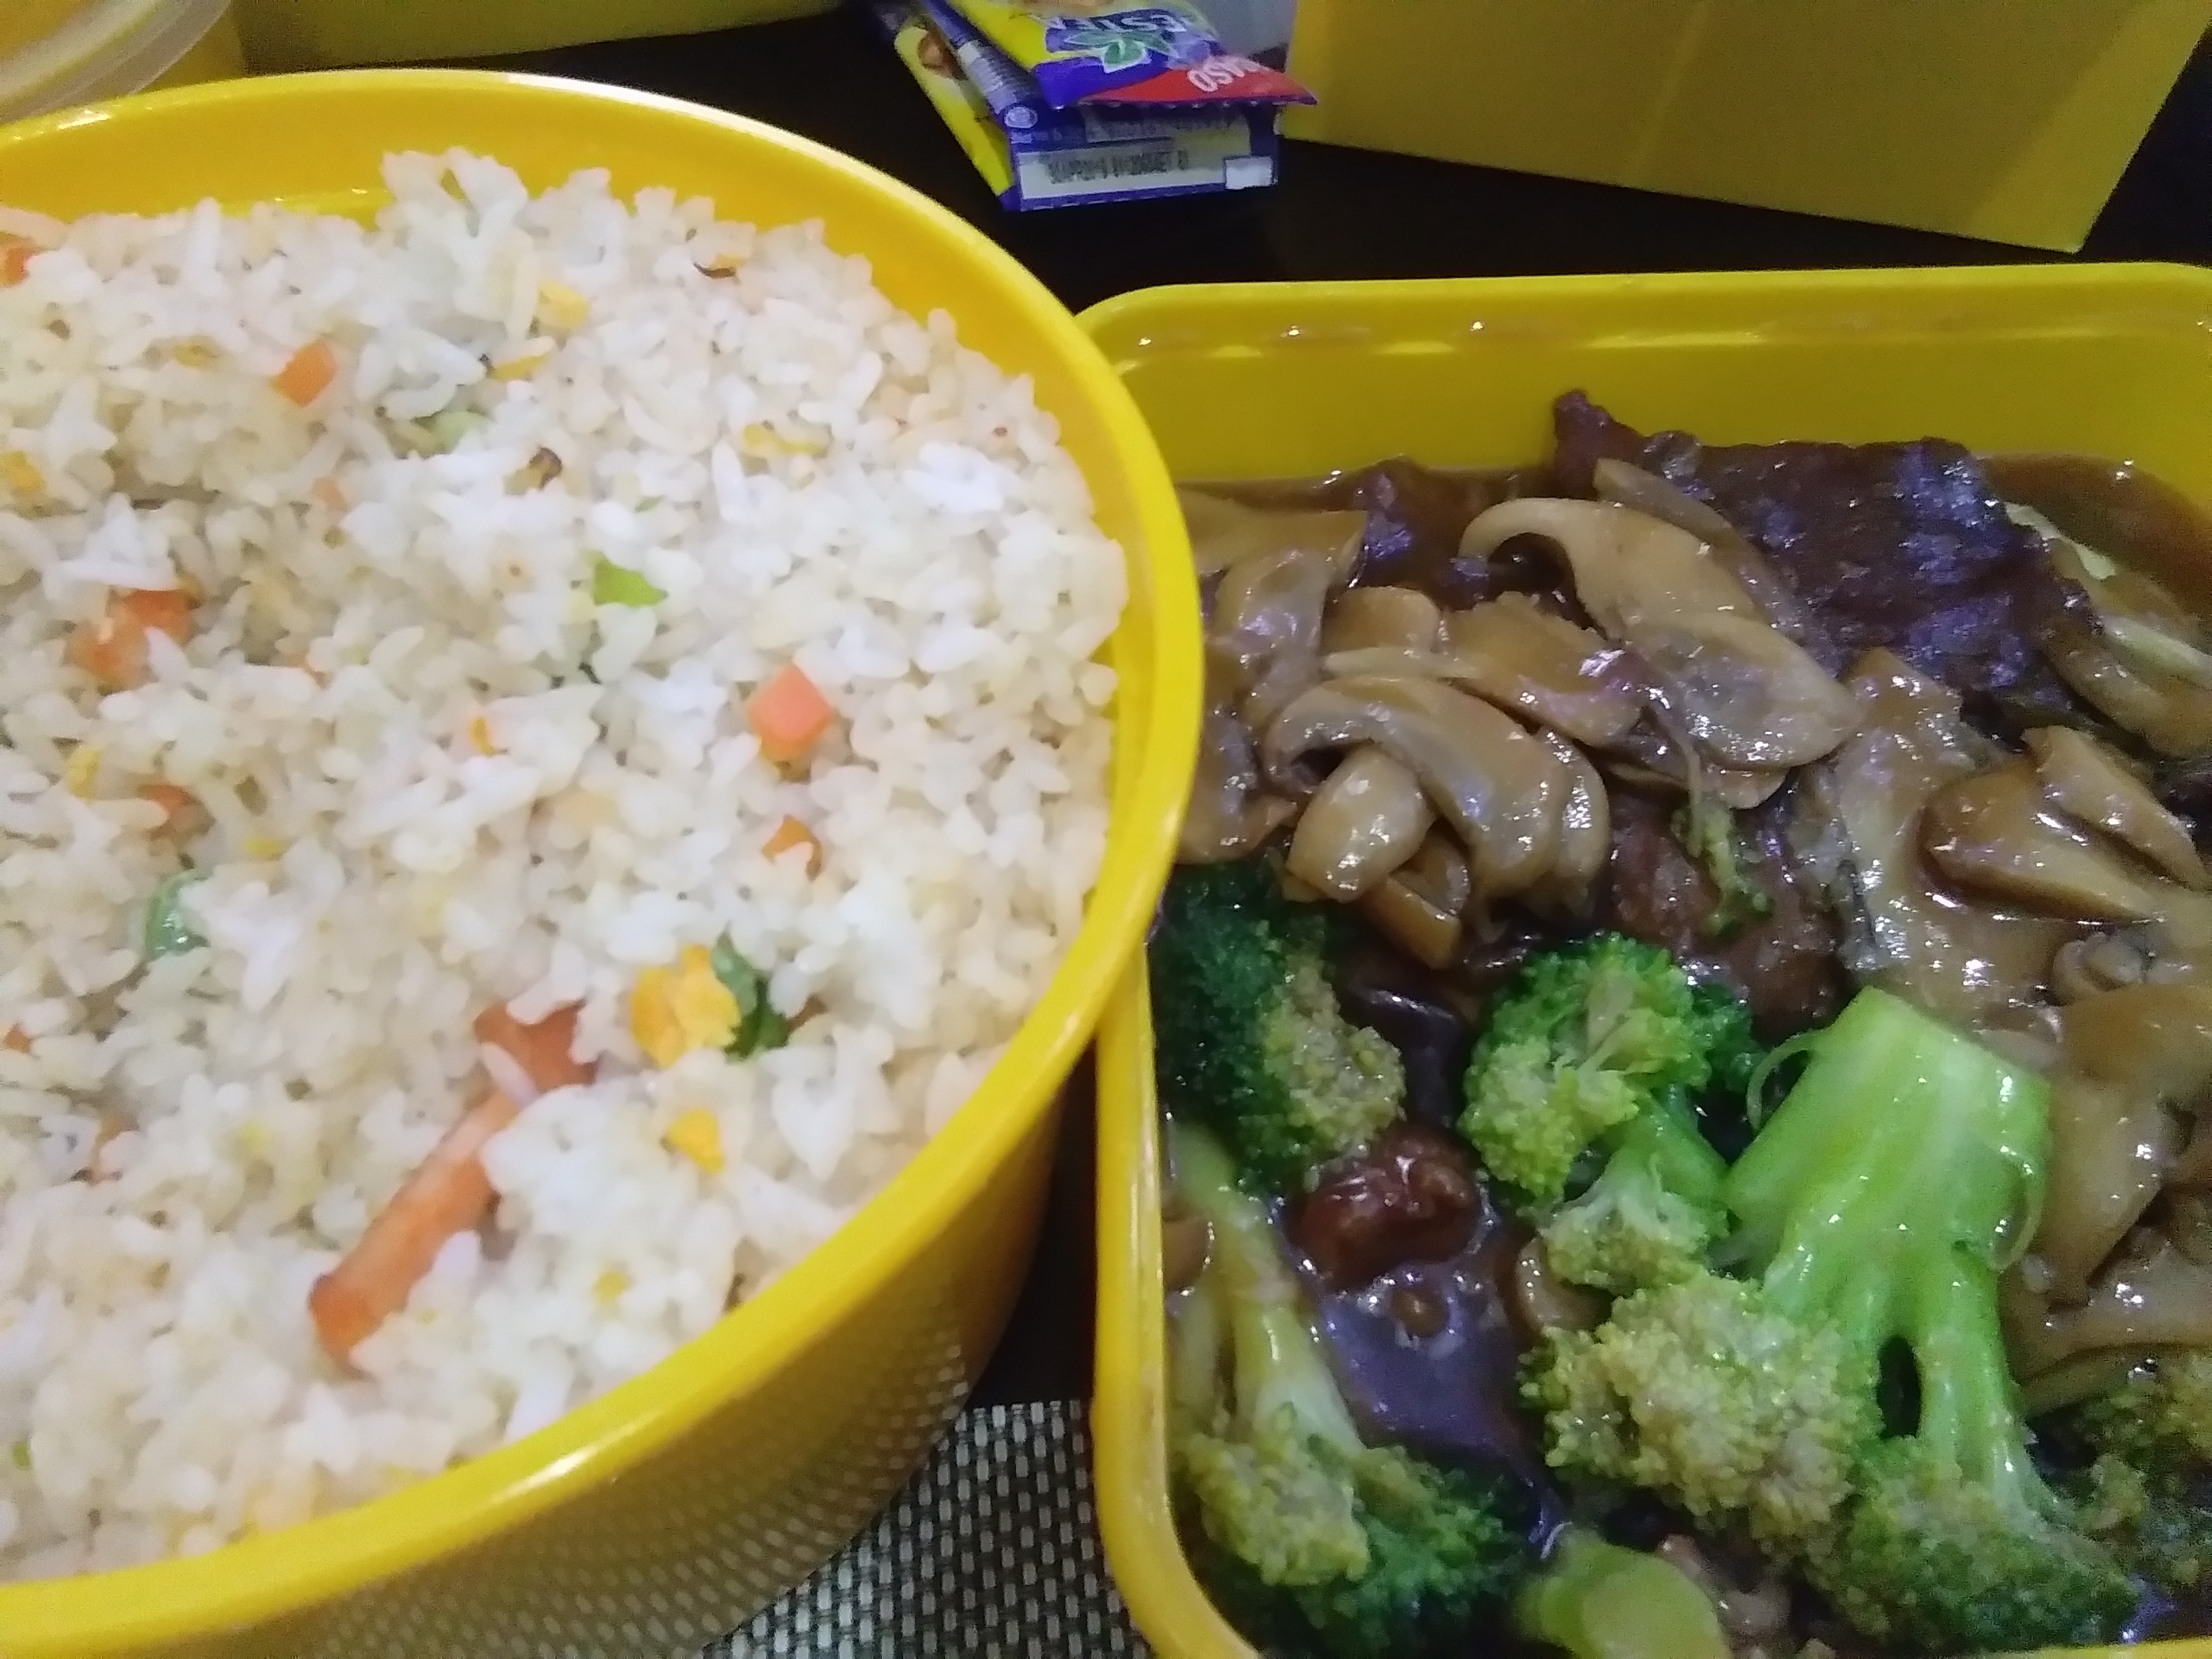 Photo is Yang chow Fried Rice and Stir Fry Beef with Broccoli